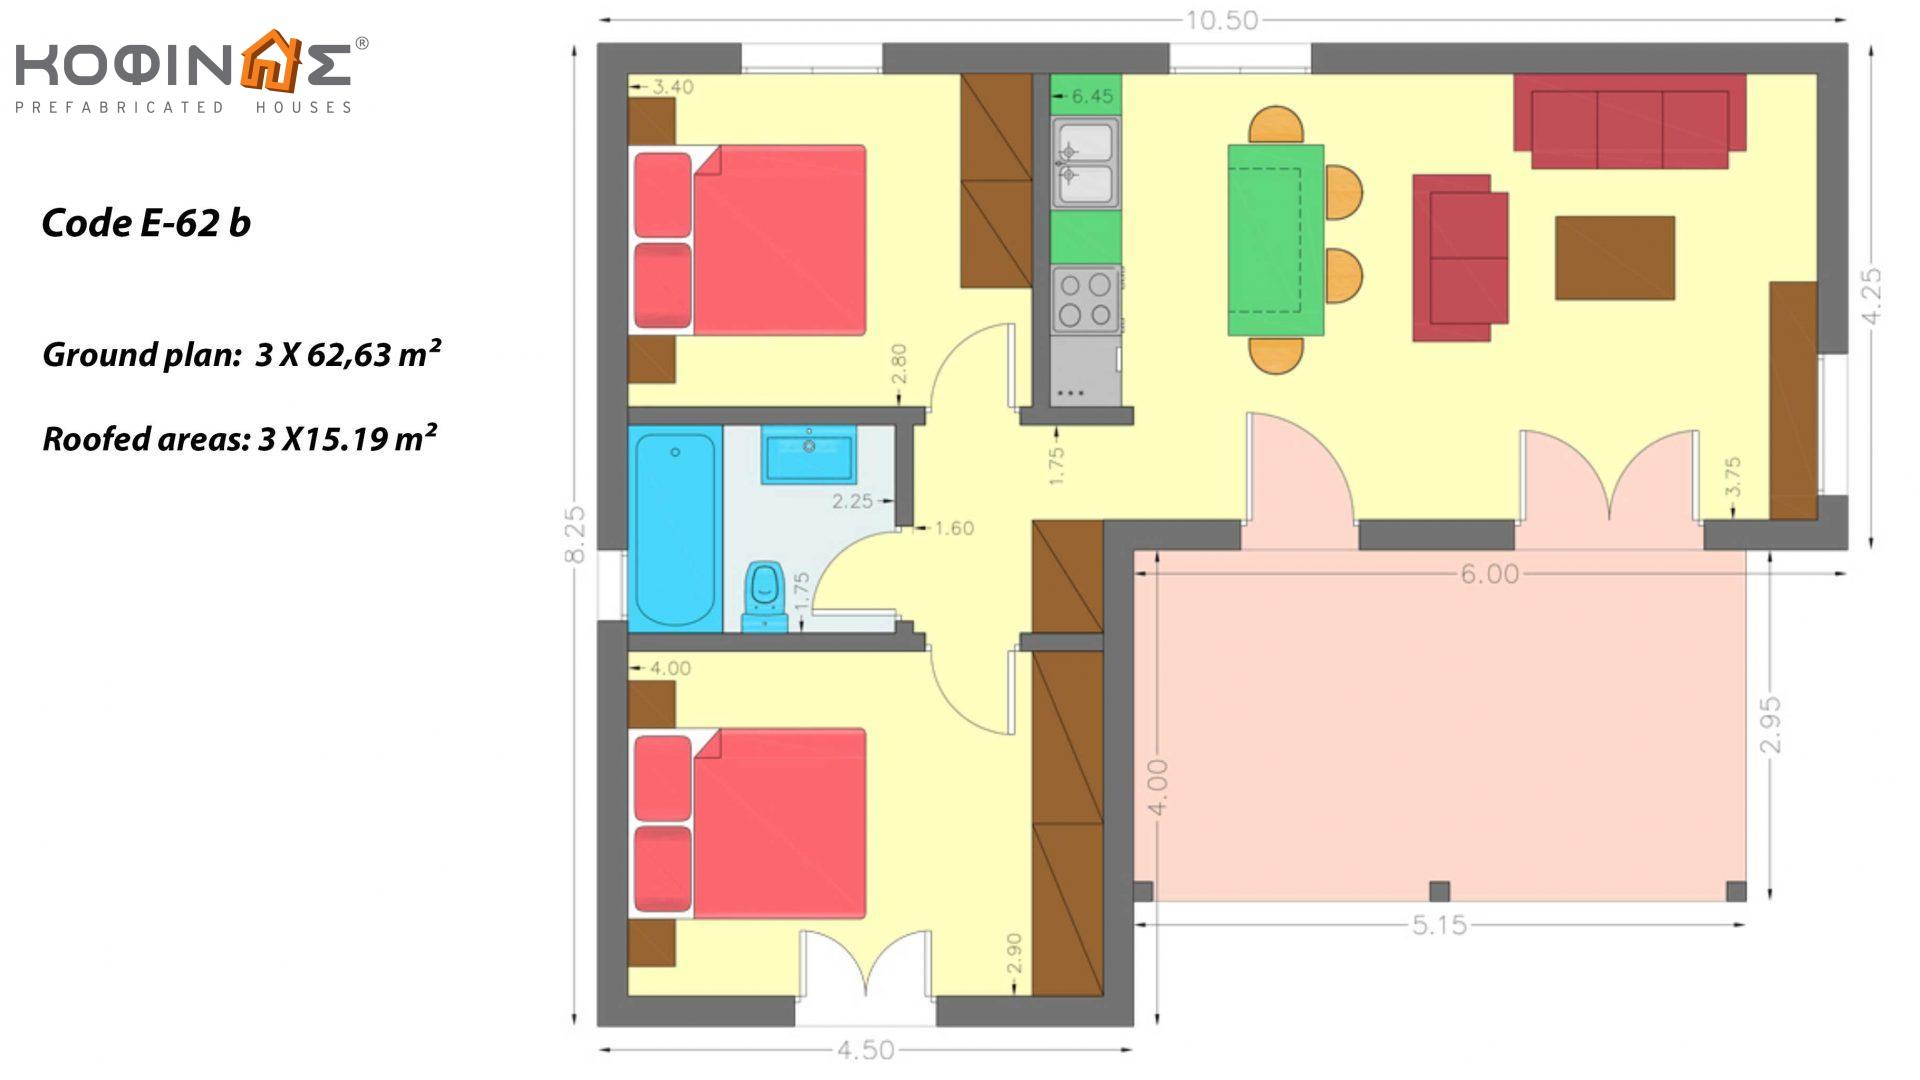 1 Storey Complex E-62b, total surface of 3 x 62,63 = 187,89 m², covered areas 45.57 m²